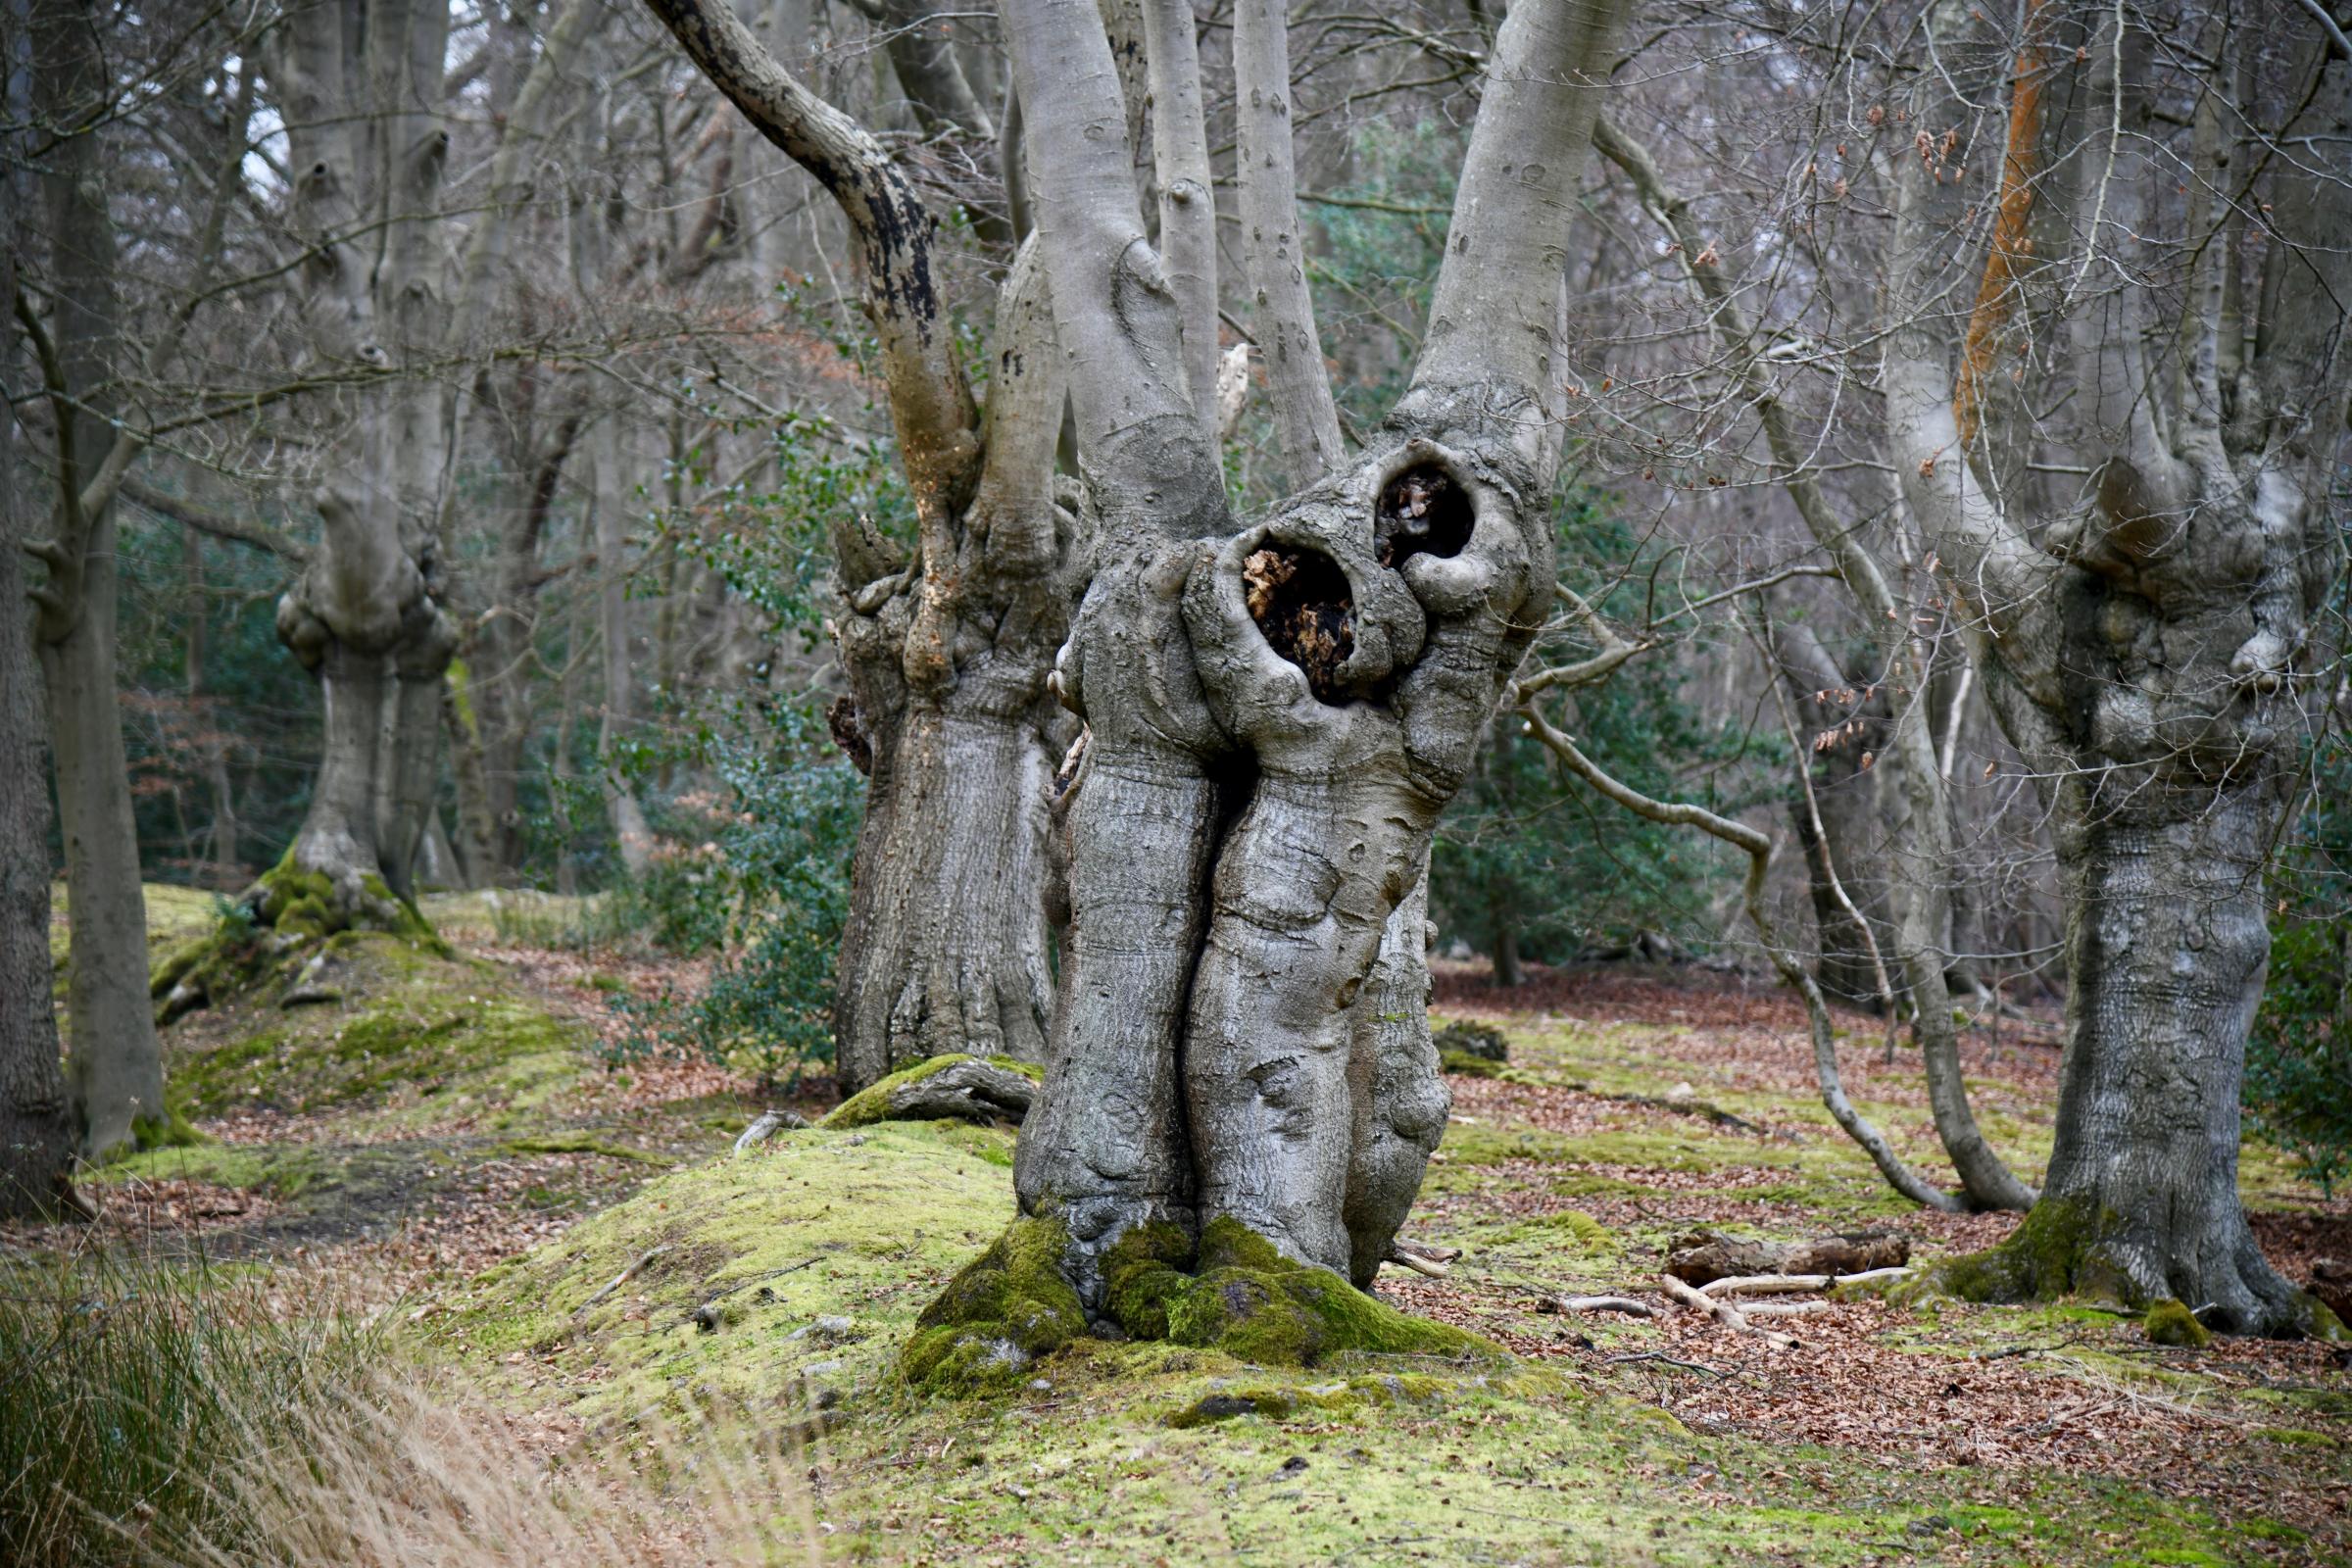 Ancient trees in Epping Forest. Photo: Yve Woodhouse, City of London Corporation